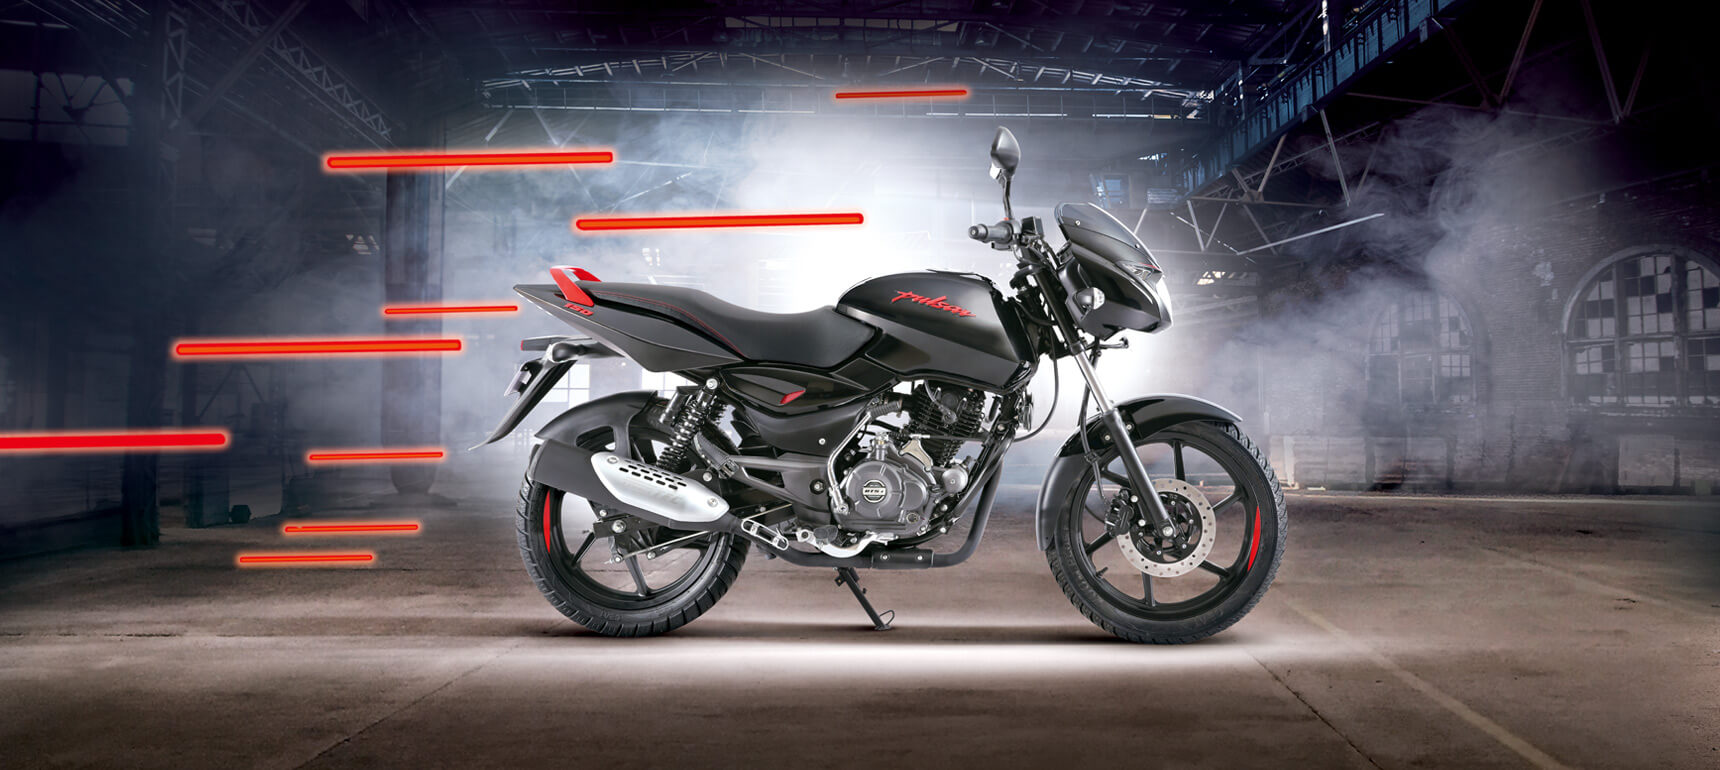 Black and Red Bajaj Pulsar 150cc Neon Motorcycle in a warehouse 